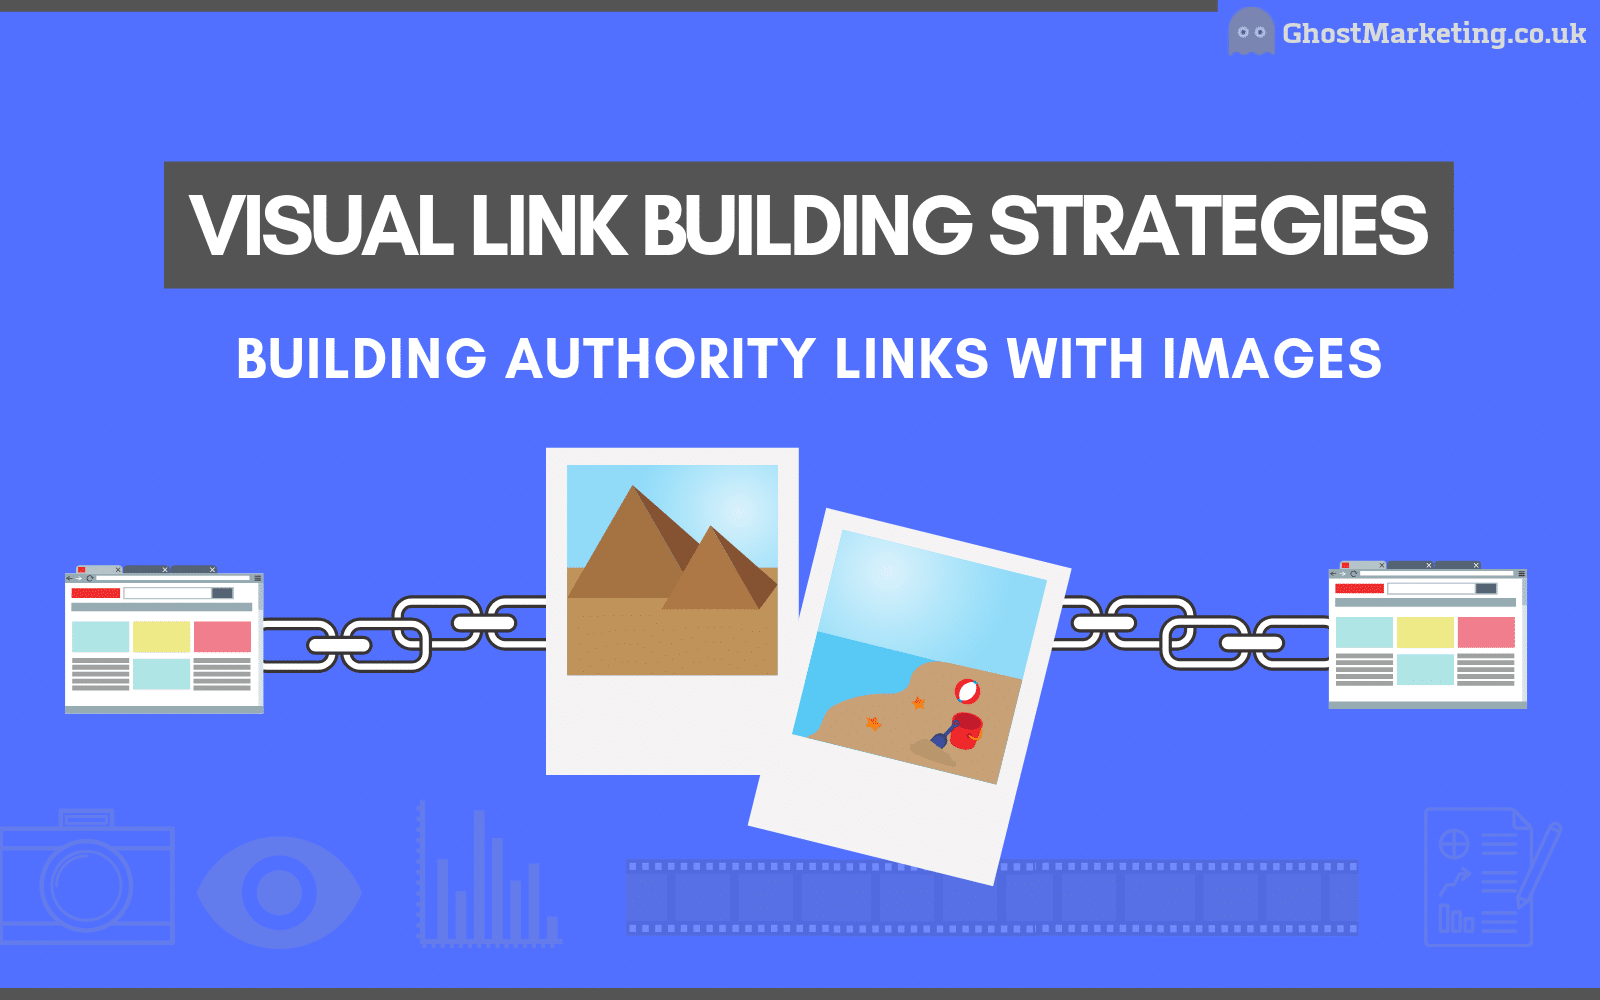 Image Link Building Guide - Visual Link Building - Ghost Marketing